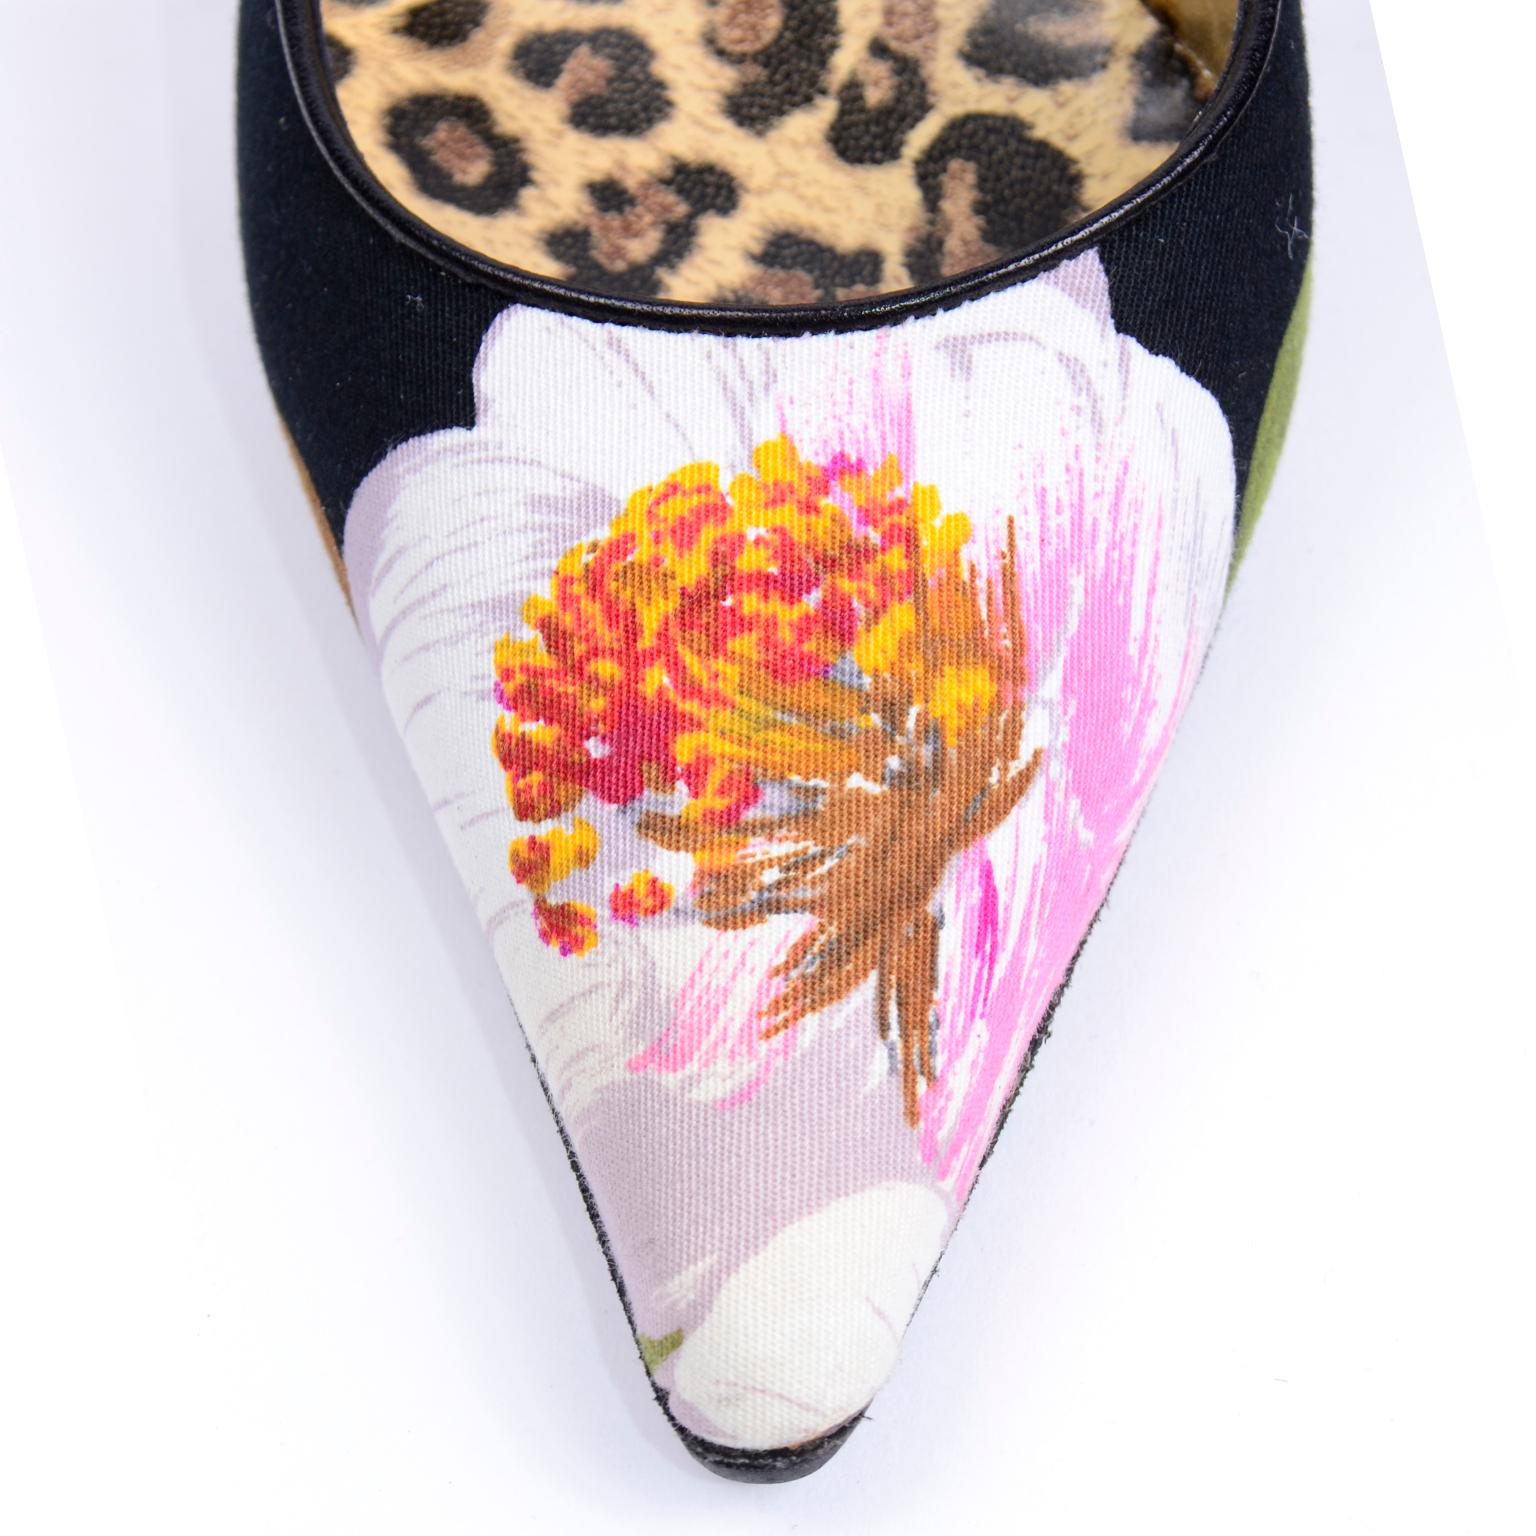 Dolce & Gabbana Pink White & Floral Slingback Pointed Toe Shoes w/ Box & Dustbag In Excellent Condition For Sale In Portland, OR